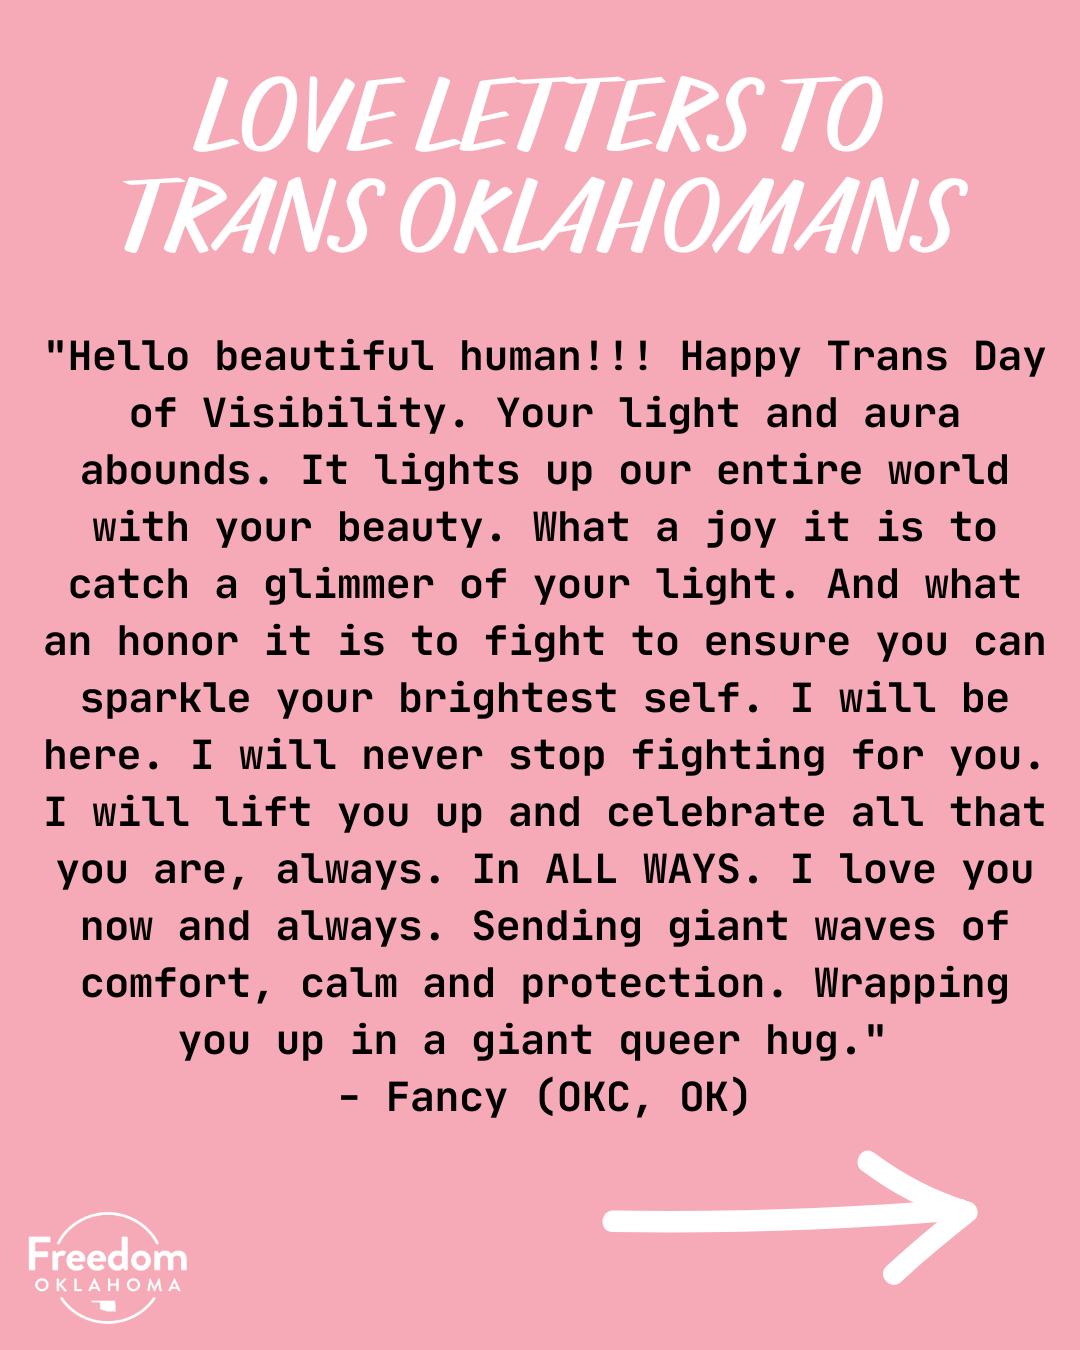  "Love Letters to Trans Oklahomans" and the text of a love letter on a pink background. ""Hello beautiful human!!! Happy Trans Day of Visibility. Your light and aura abounds. It lights up our entire world with your beauty. What a joy it is to catch a